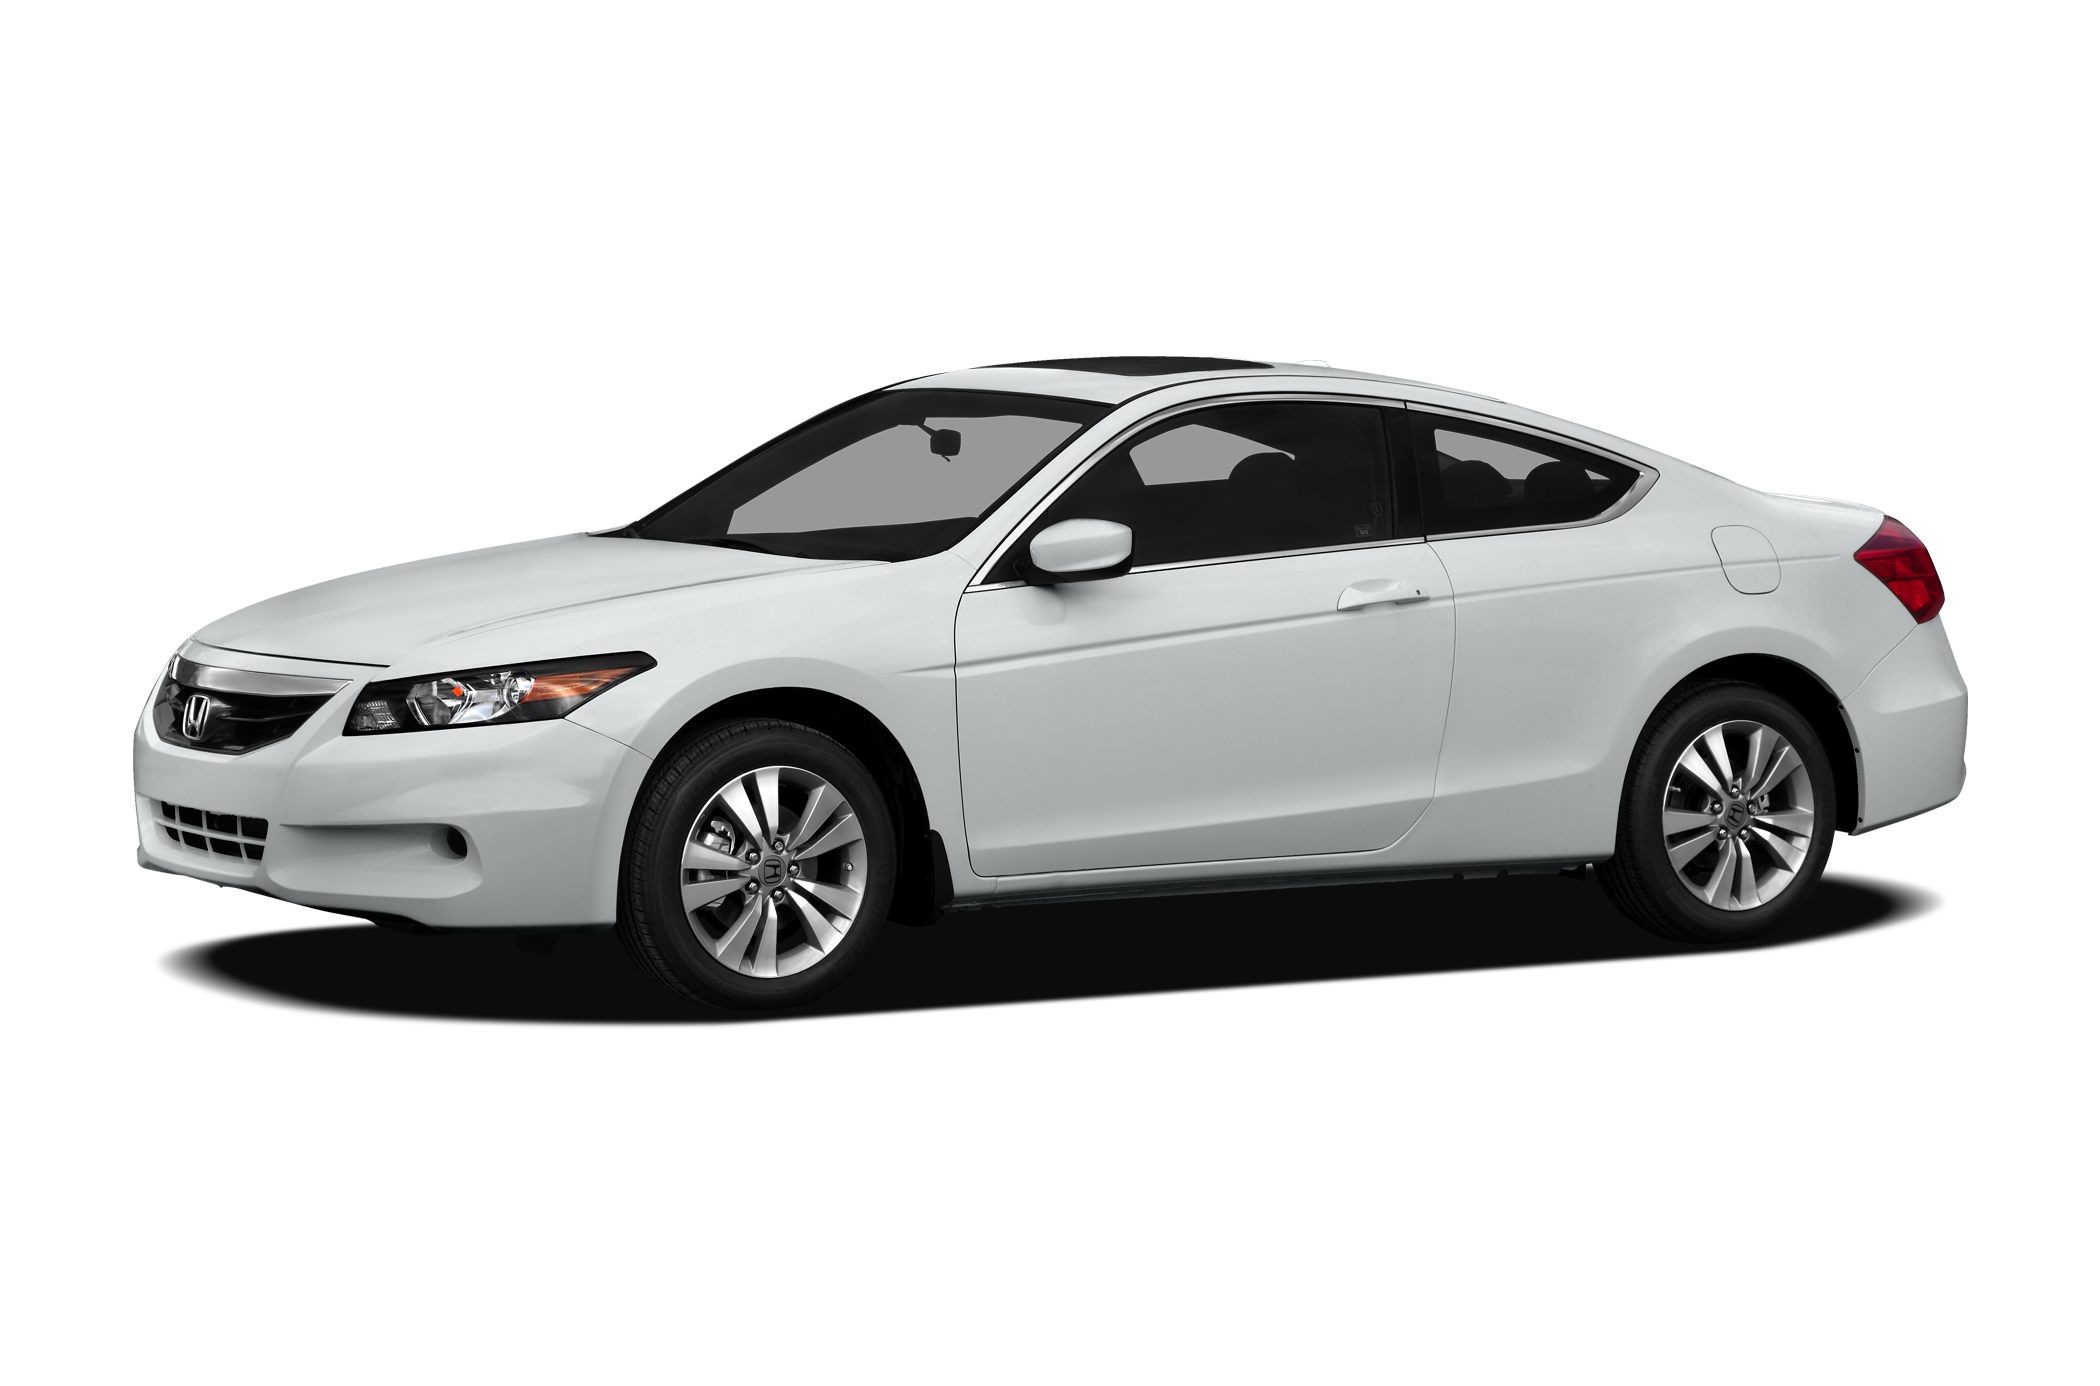 2011 Honda Accord 3 5 Ex L 2dr Coupe Pictures